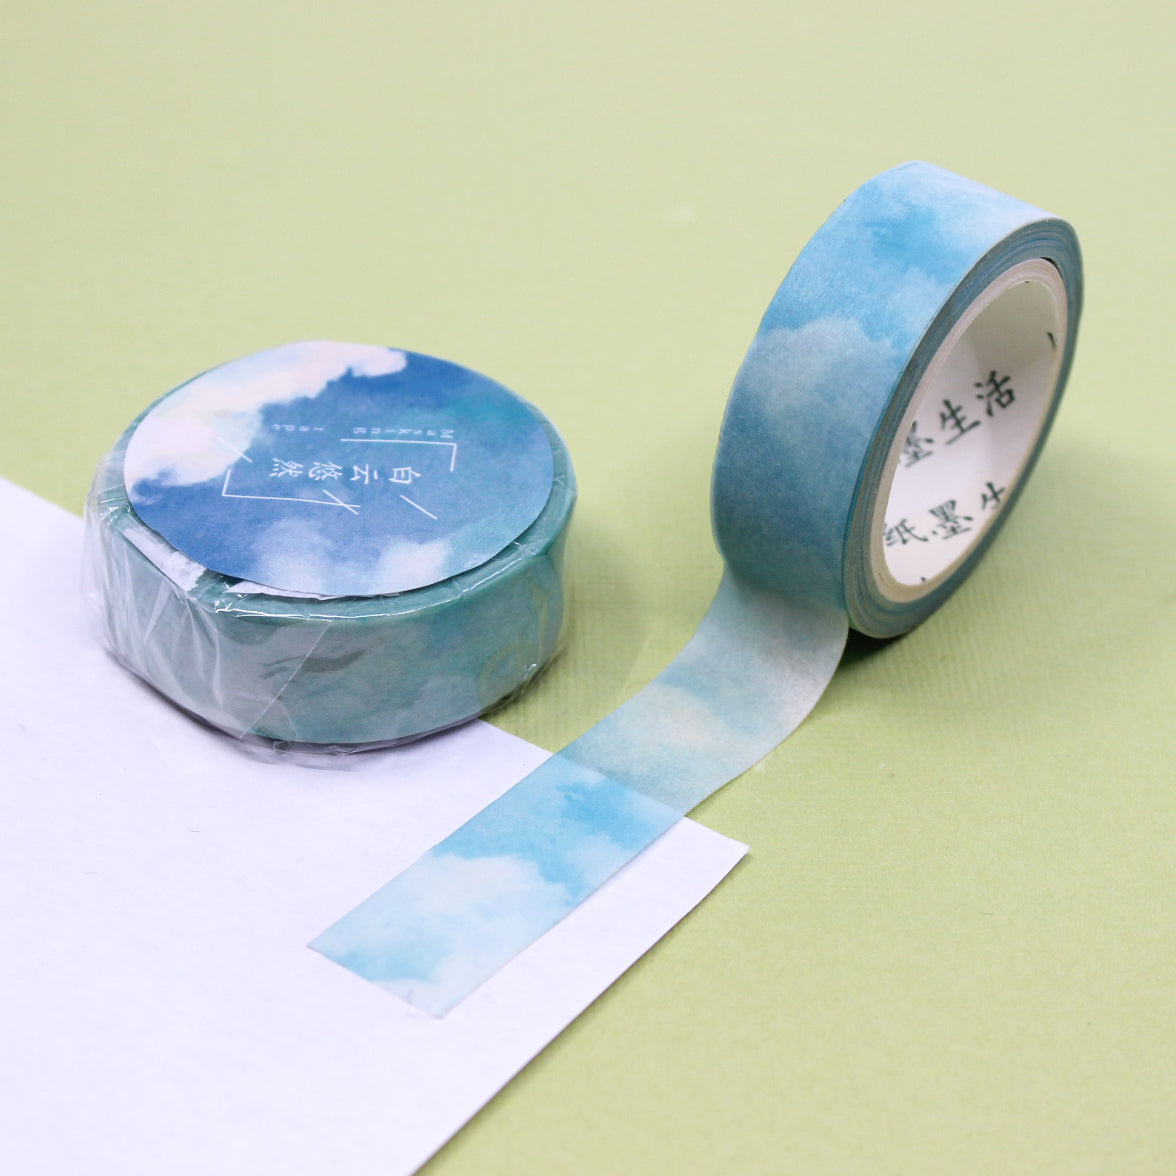 This blue clouds in the sky watercolor washi tape is the perfect addition to your washi collection. The simplicity of the pattern is perfect for accenting and matching any project's theme while adding a beautiful and interesting pattern. This tape is sold at BBB Supplies Craft Shop.